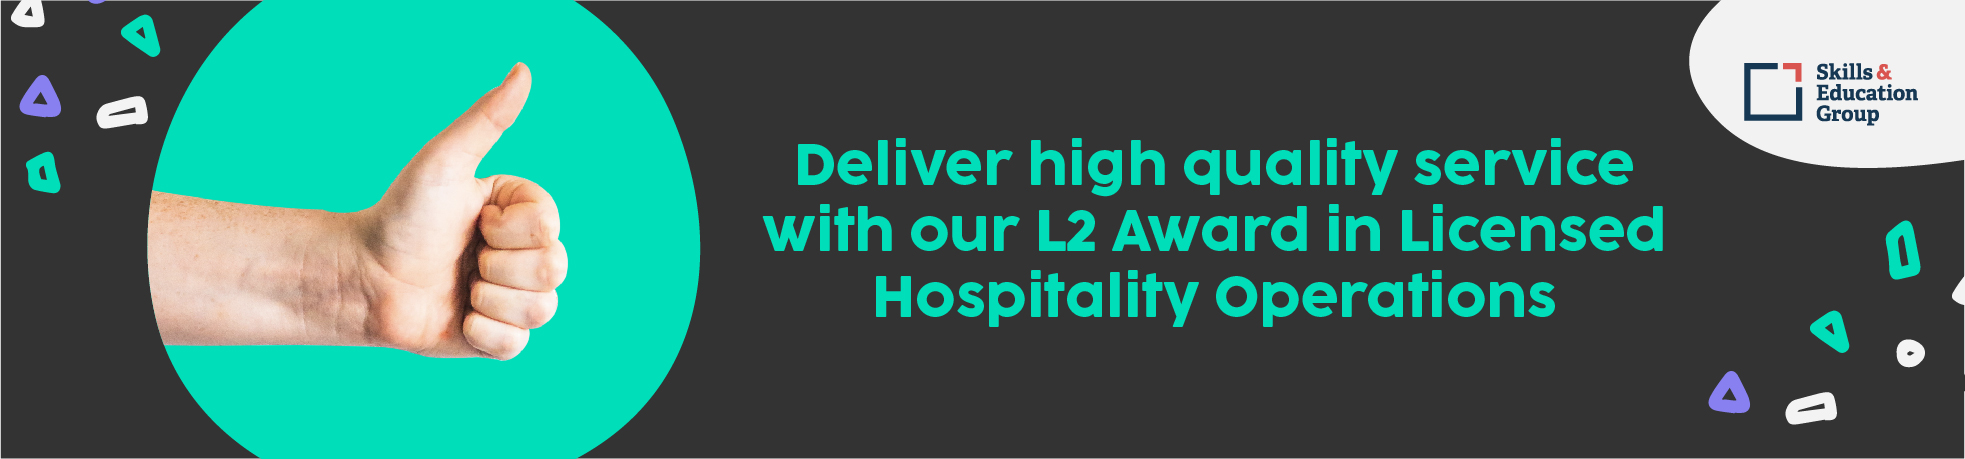 Thumbs up review. Deliver high-quality service with our Level 2 Award in Licensed Hospitality Operations.